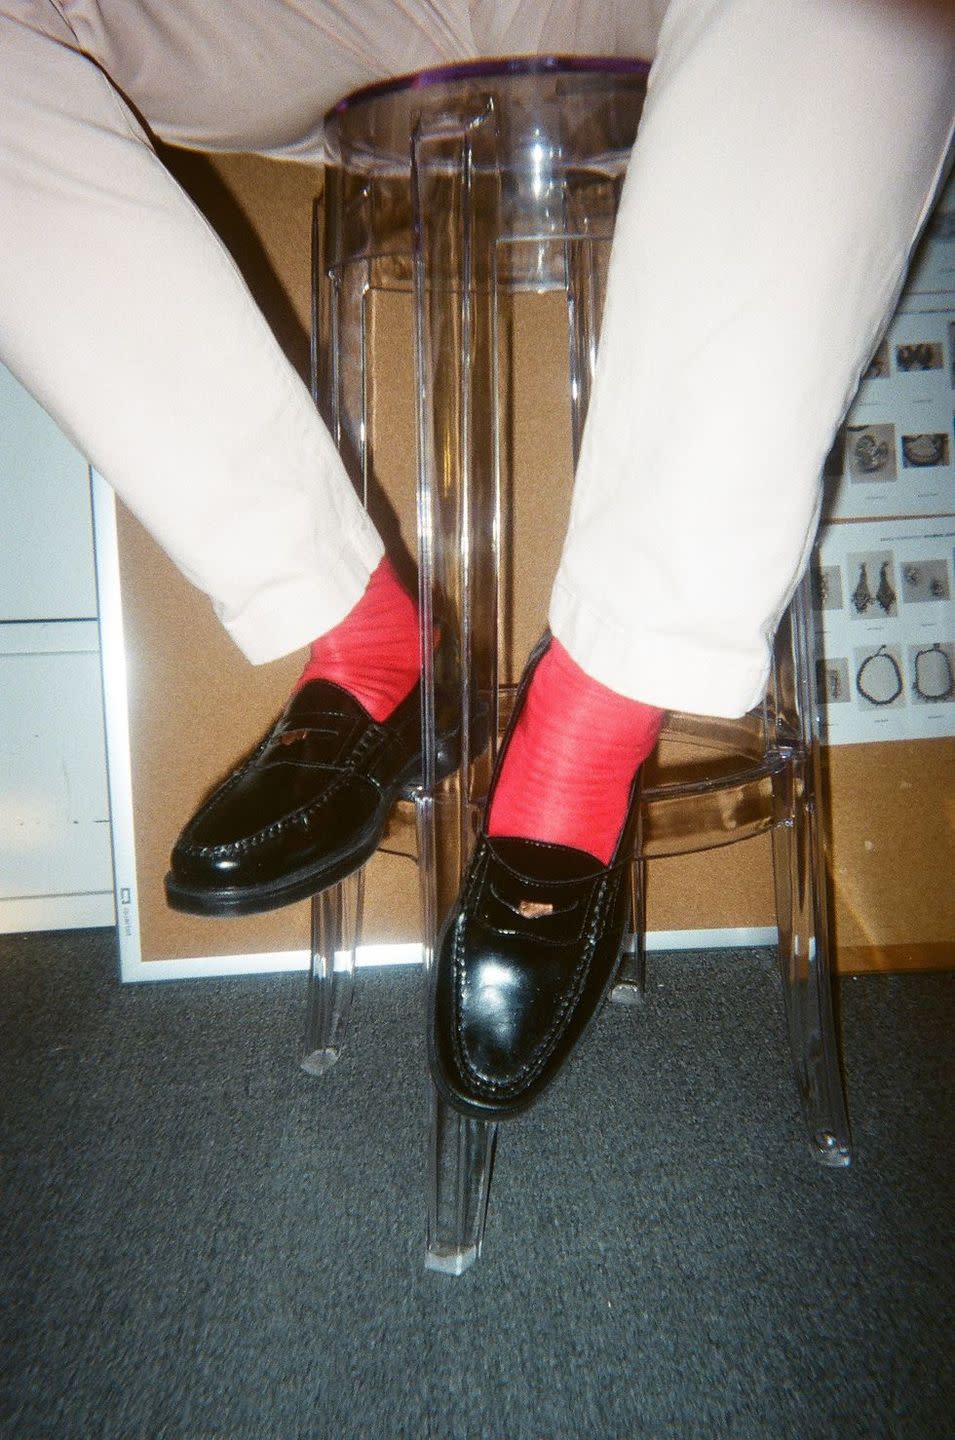 a person wearing loafers and red socks sitting on a stool